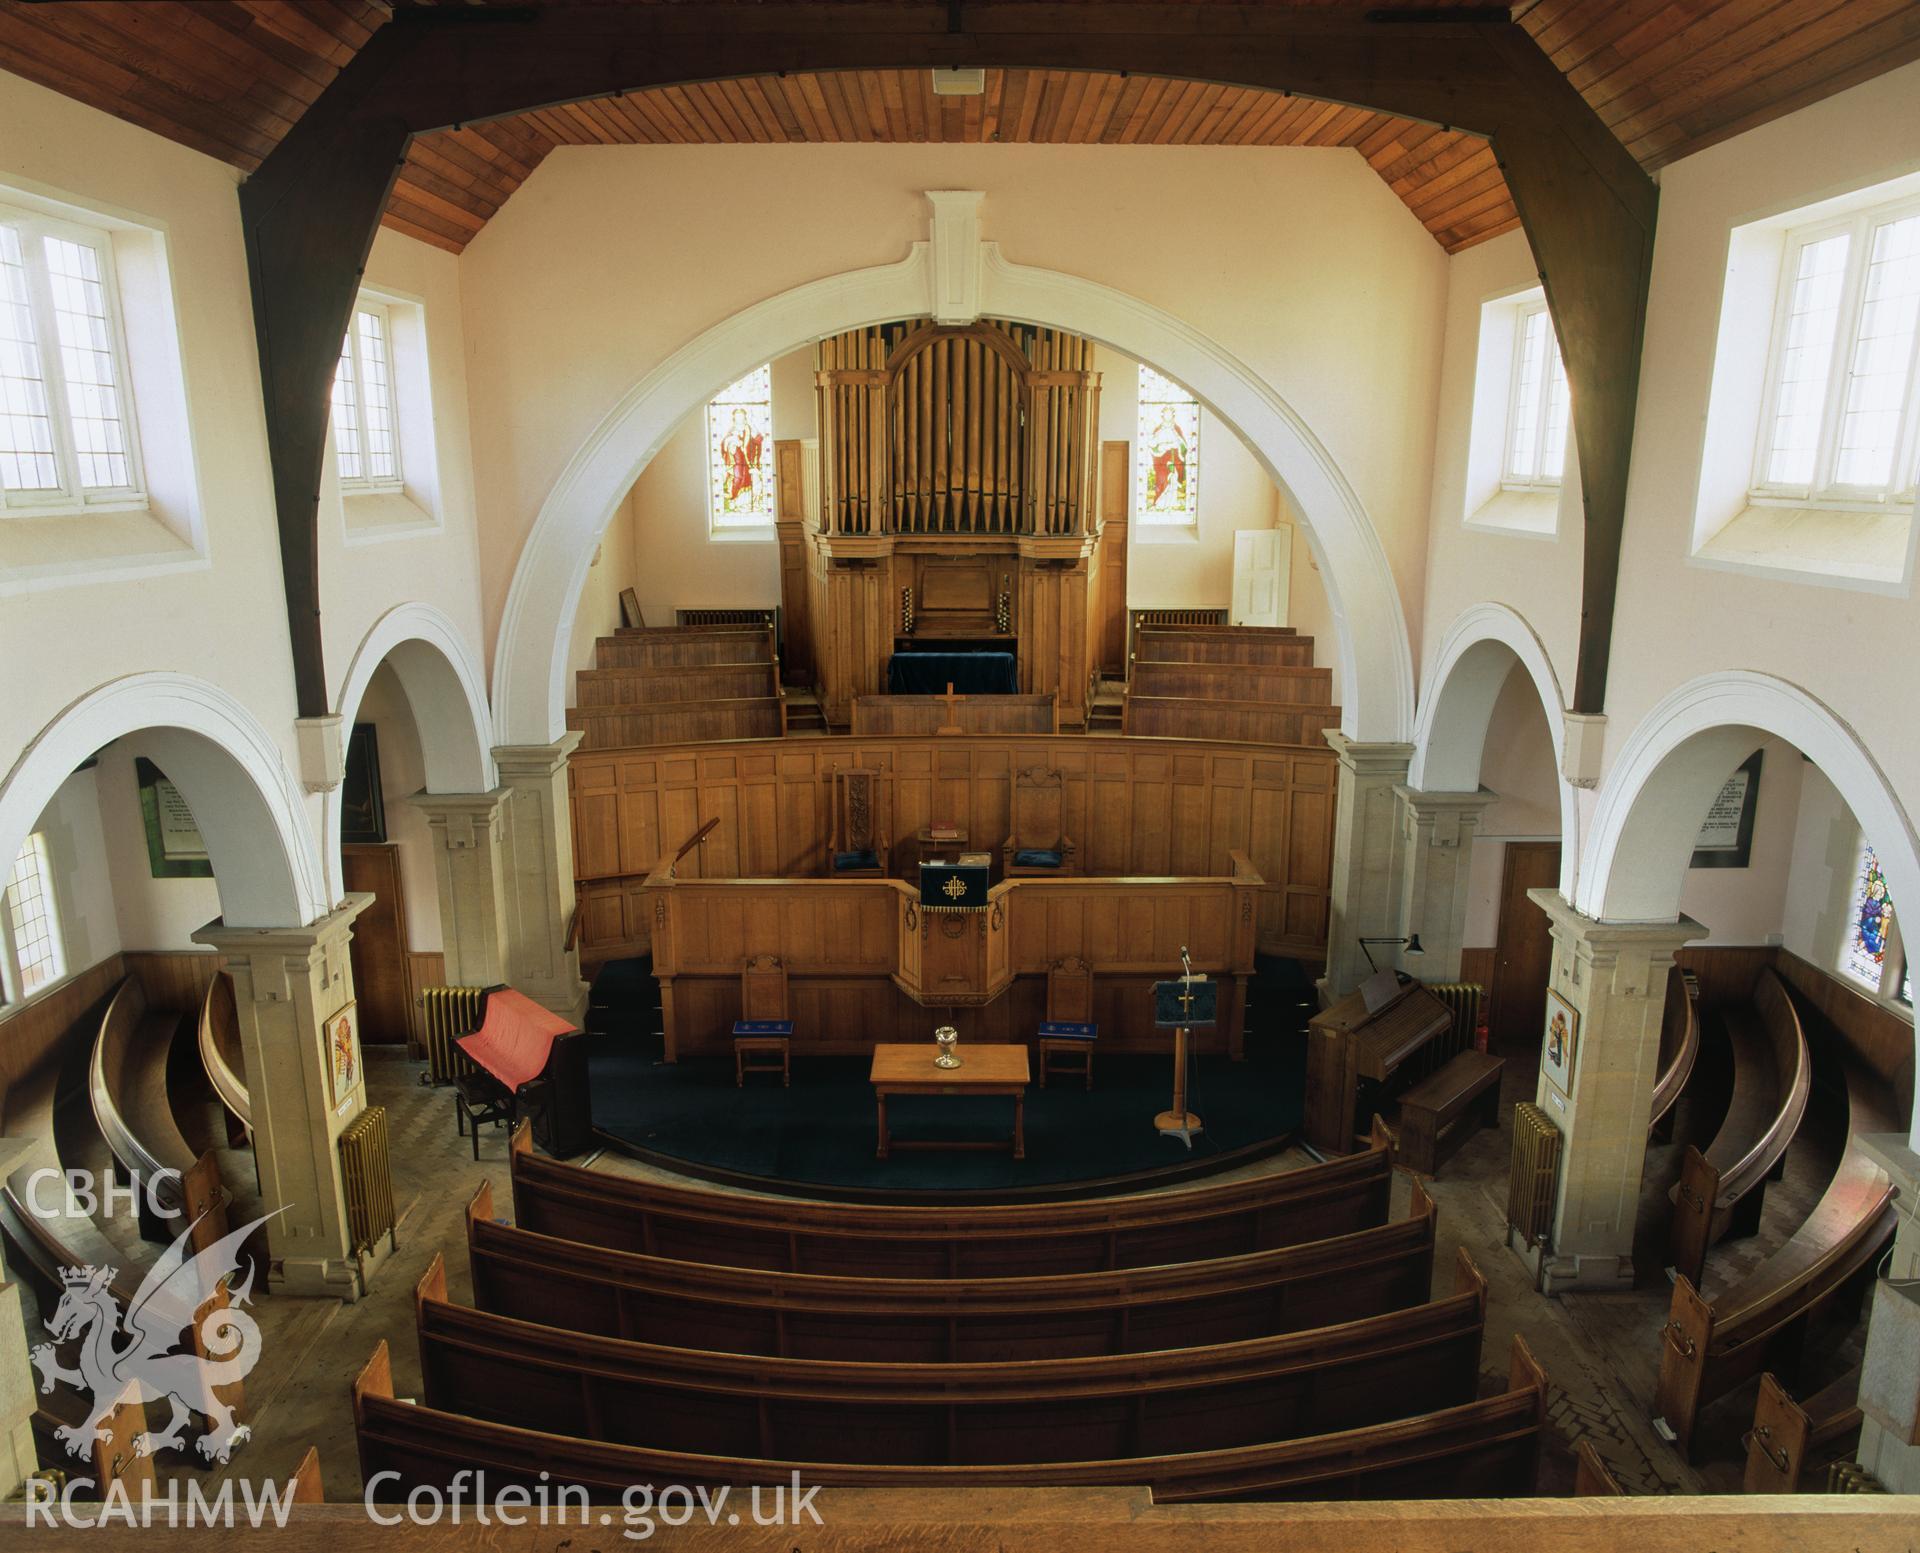 RCAHMW colour transparency showing an interior view of Tabernacle Chapel, Milford Haven, taken by Iain Wright, 2003.